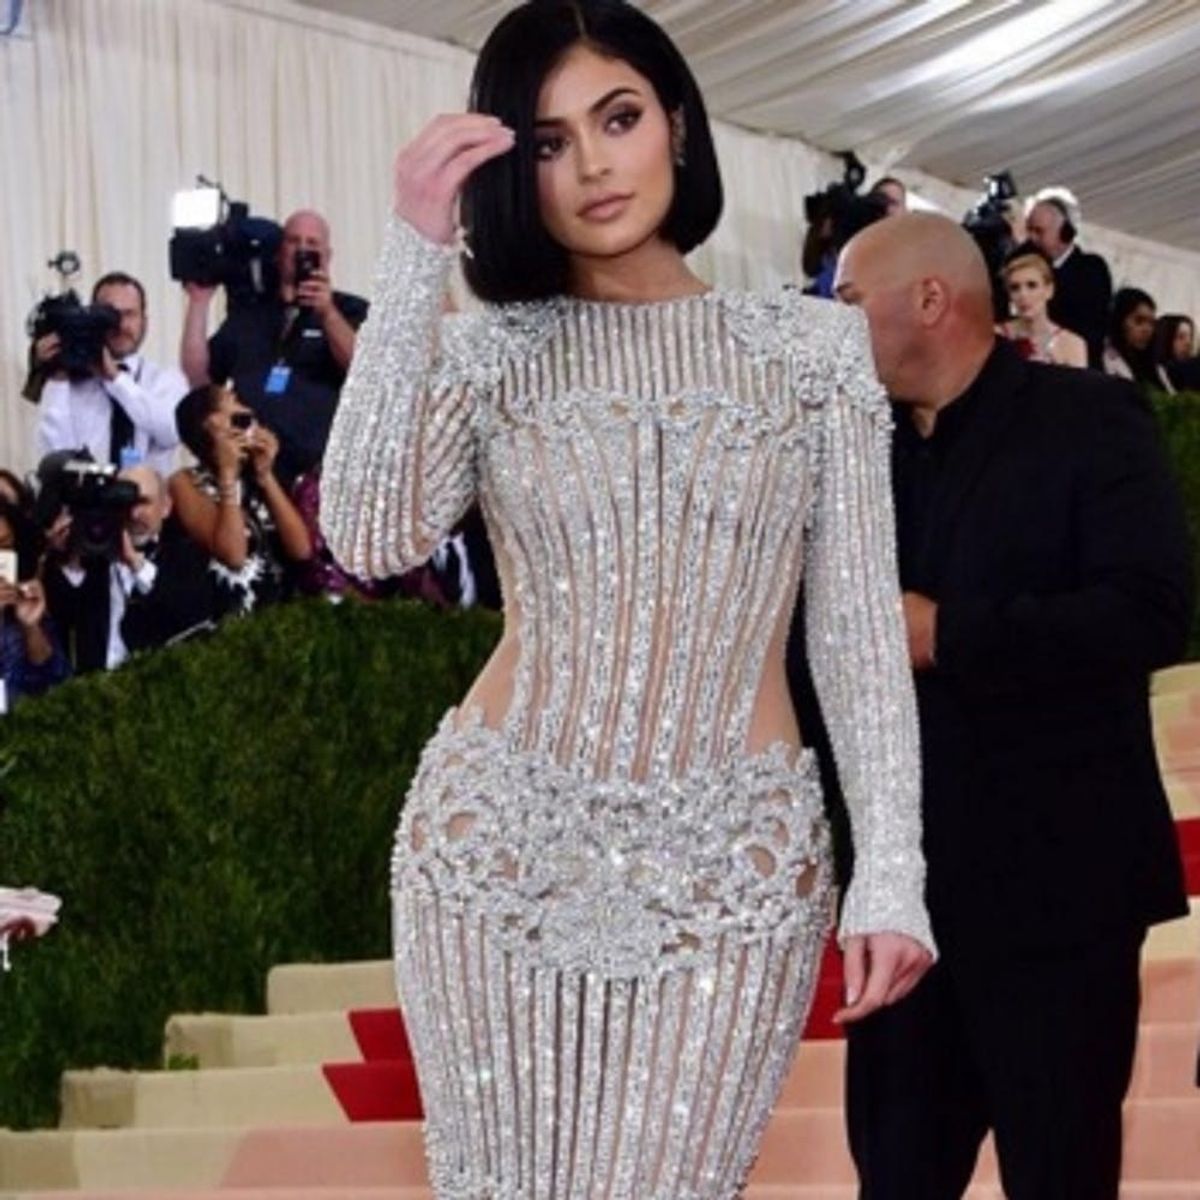 Kylie Jenner Reveals Her Met Gala Outfit Left Her Injured and Bleeding